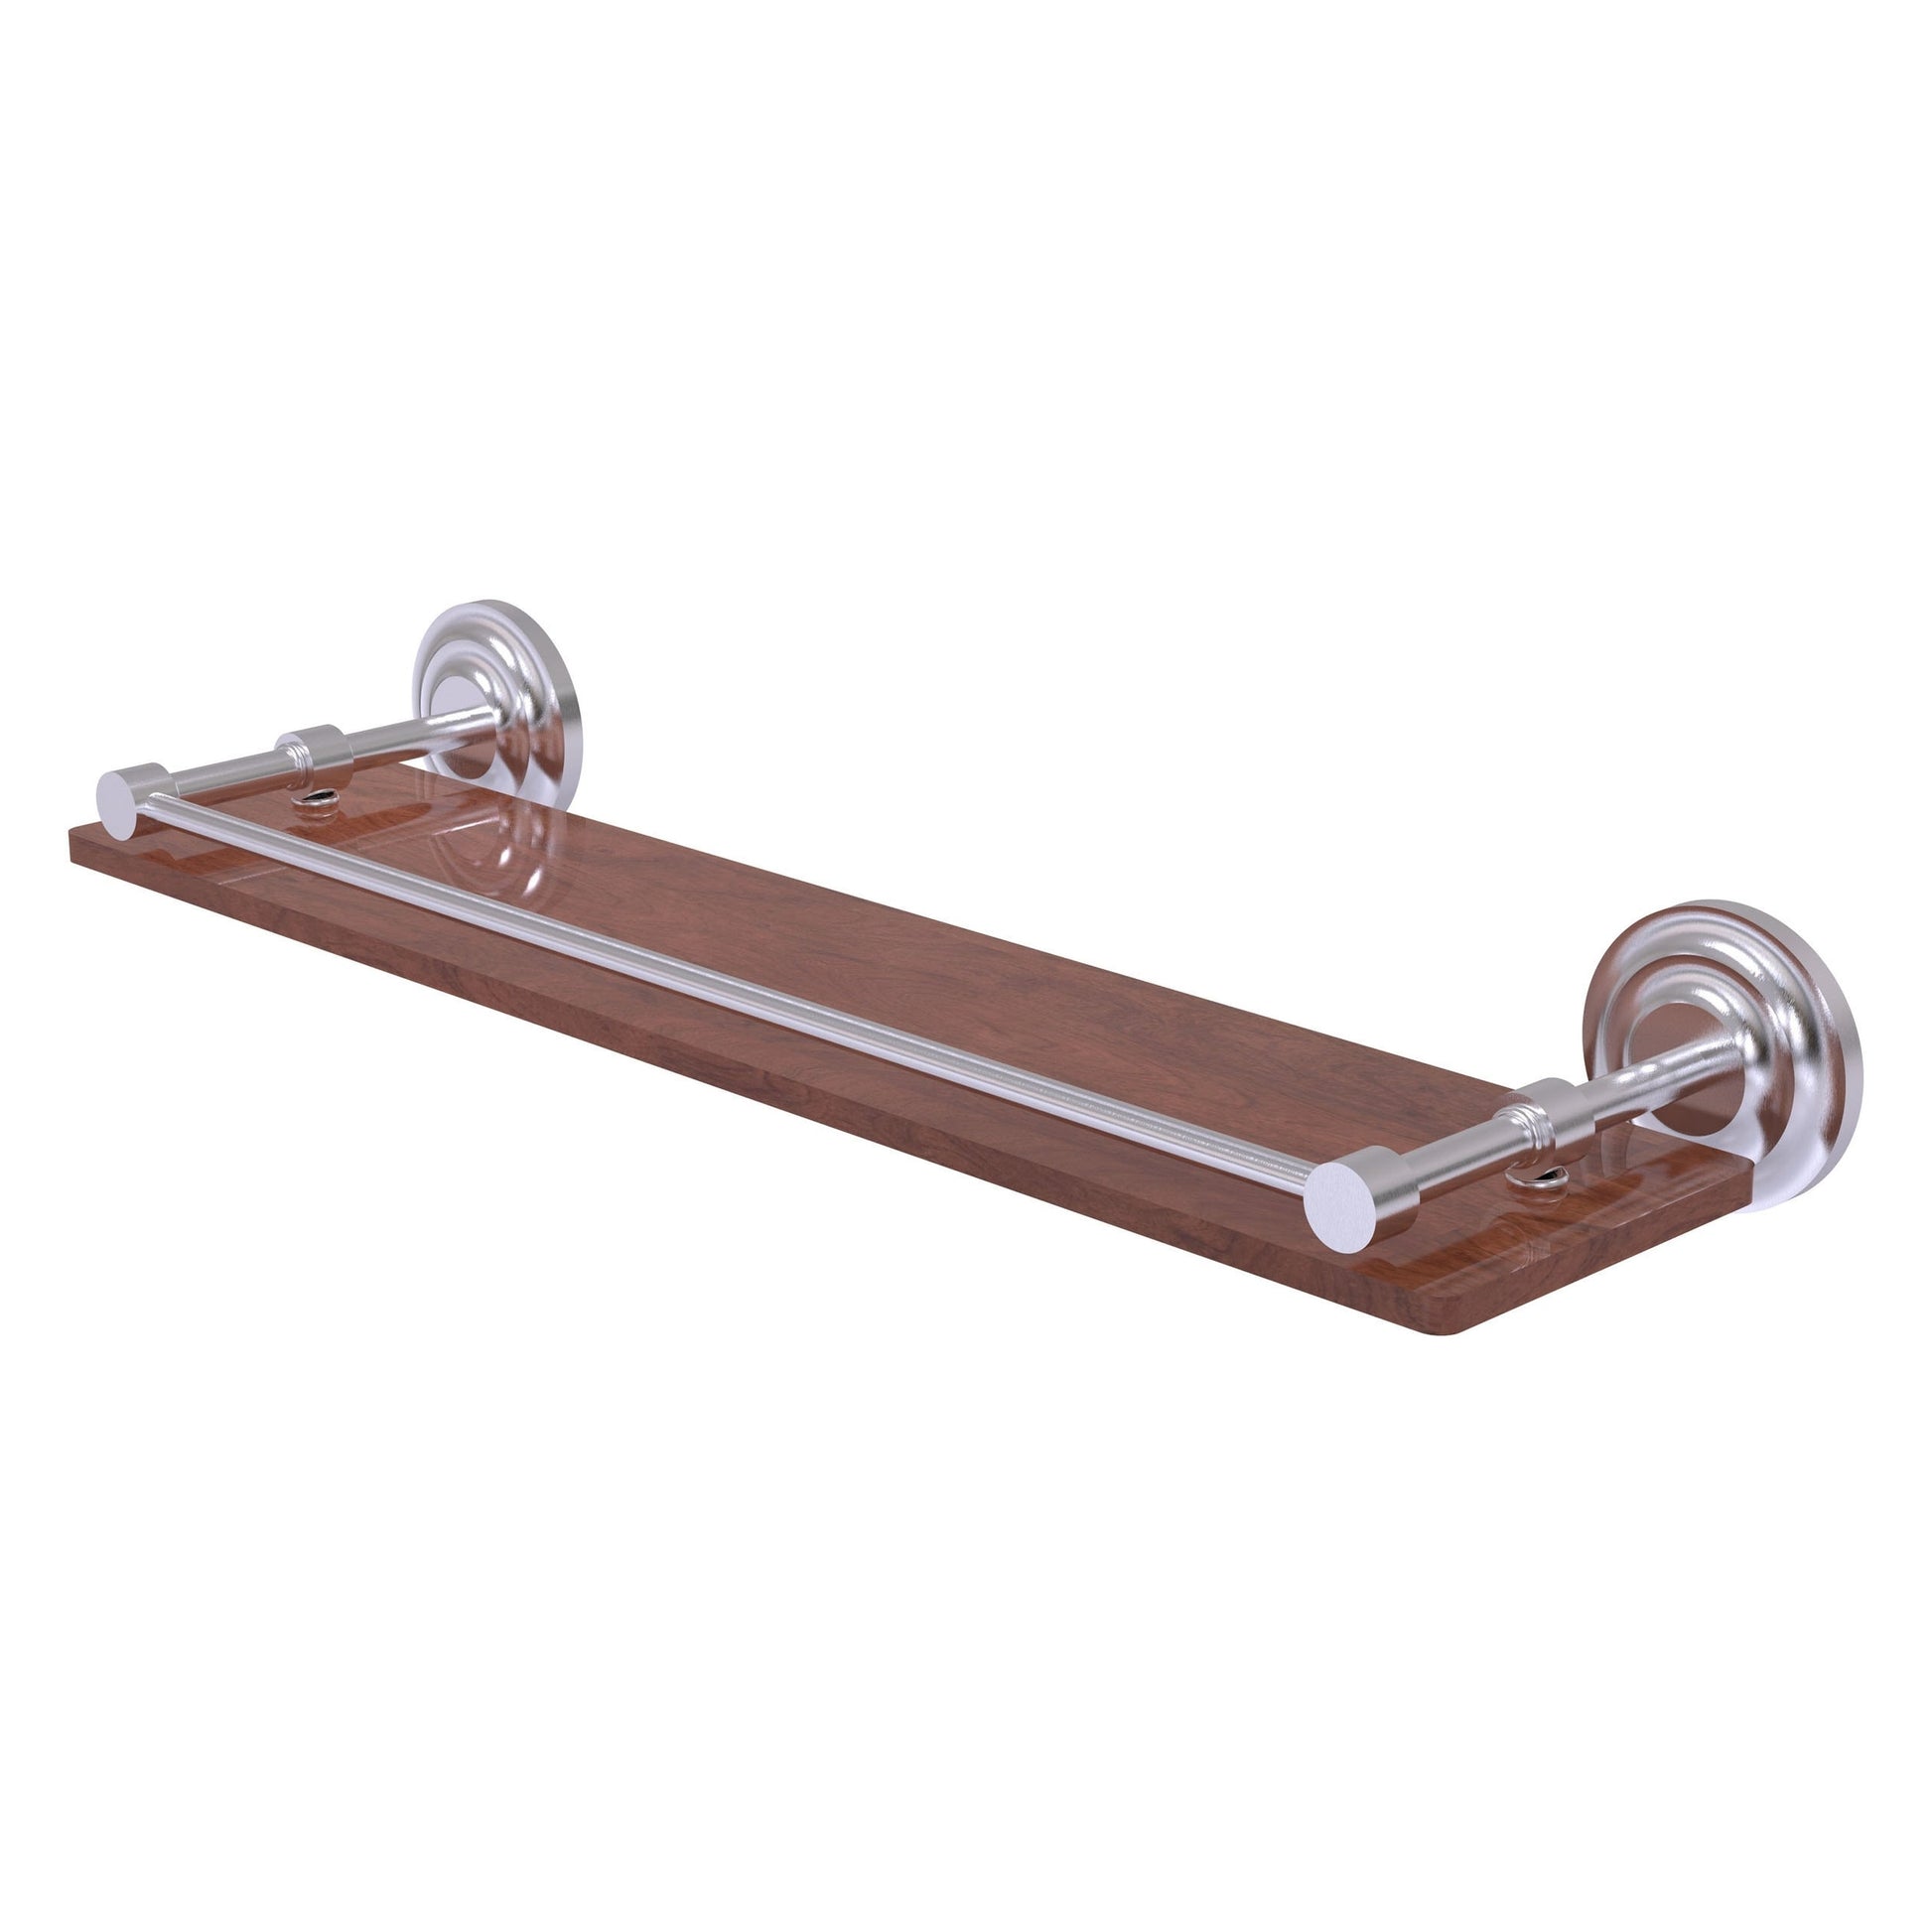 Allied Brass Que New 22" x 5" Satin Chrome Solid Brass 22-Inch Solid IPE Ironwood Shelf With Gallery Rail